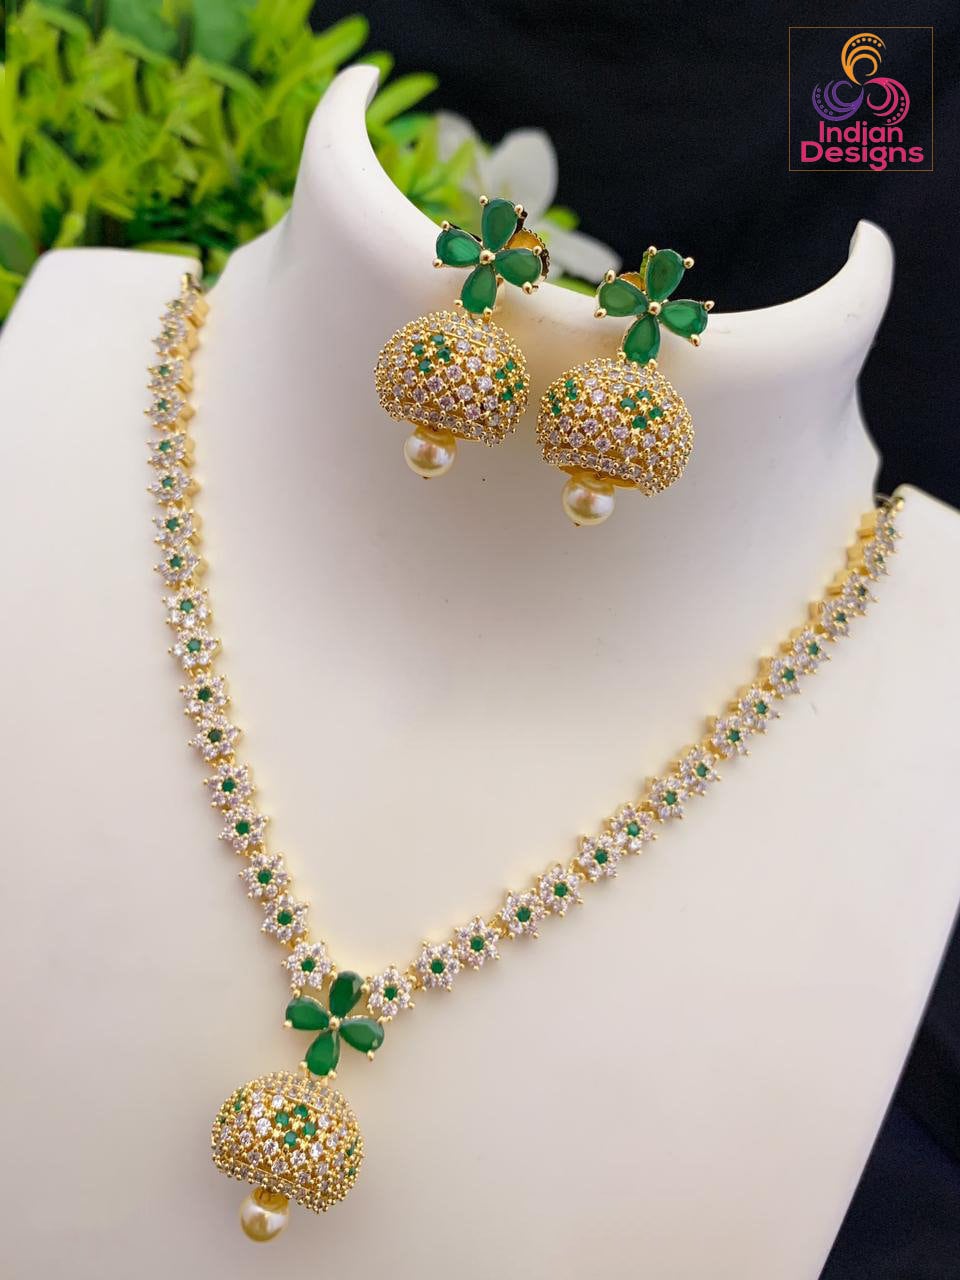 American diamond necklace Exclusive design | Floral emerald pendant necklace | Indian Cz necklace and earring sets | Jhumka necklace set